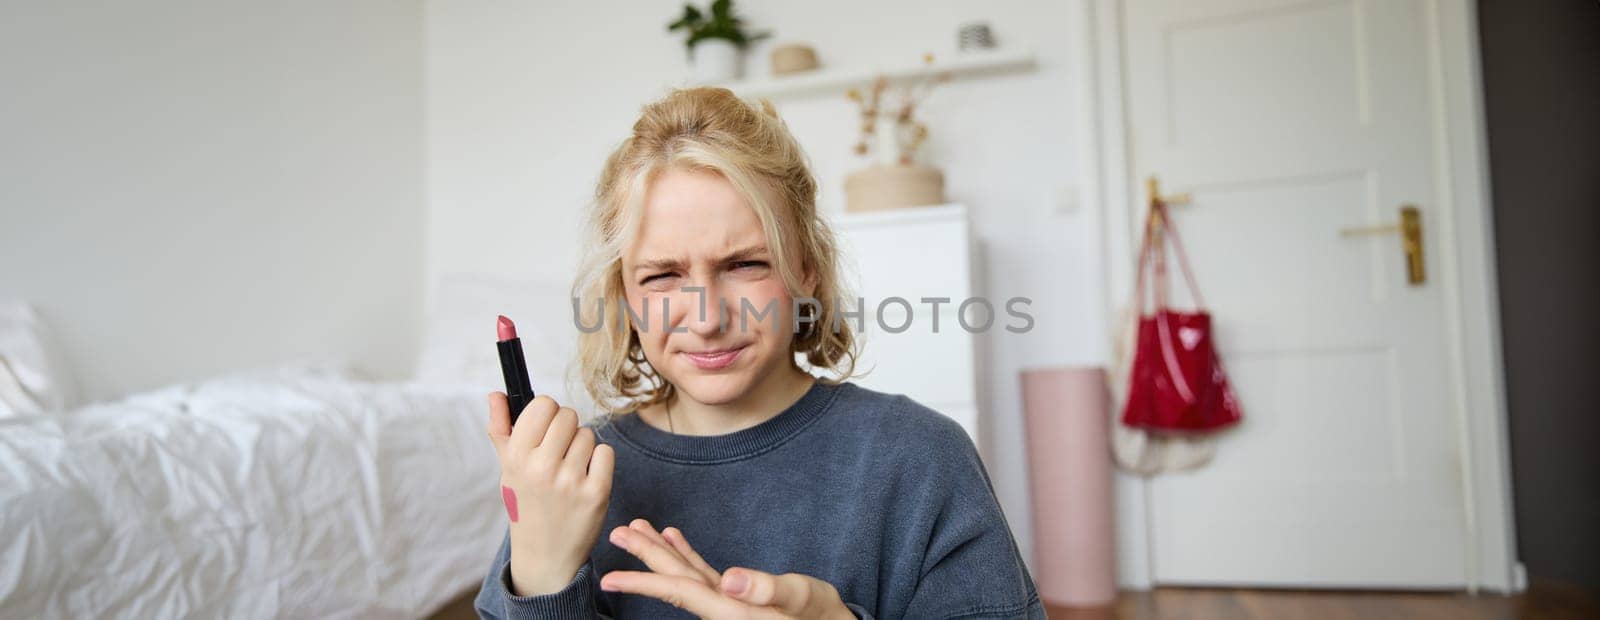 Portrait of young blogger, woman recording video about beauty, makeup products, showing lipstick and grimacing, express negative opinion, creating a lifestyle vlog content by Benzoix